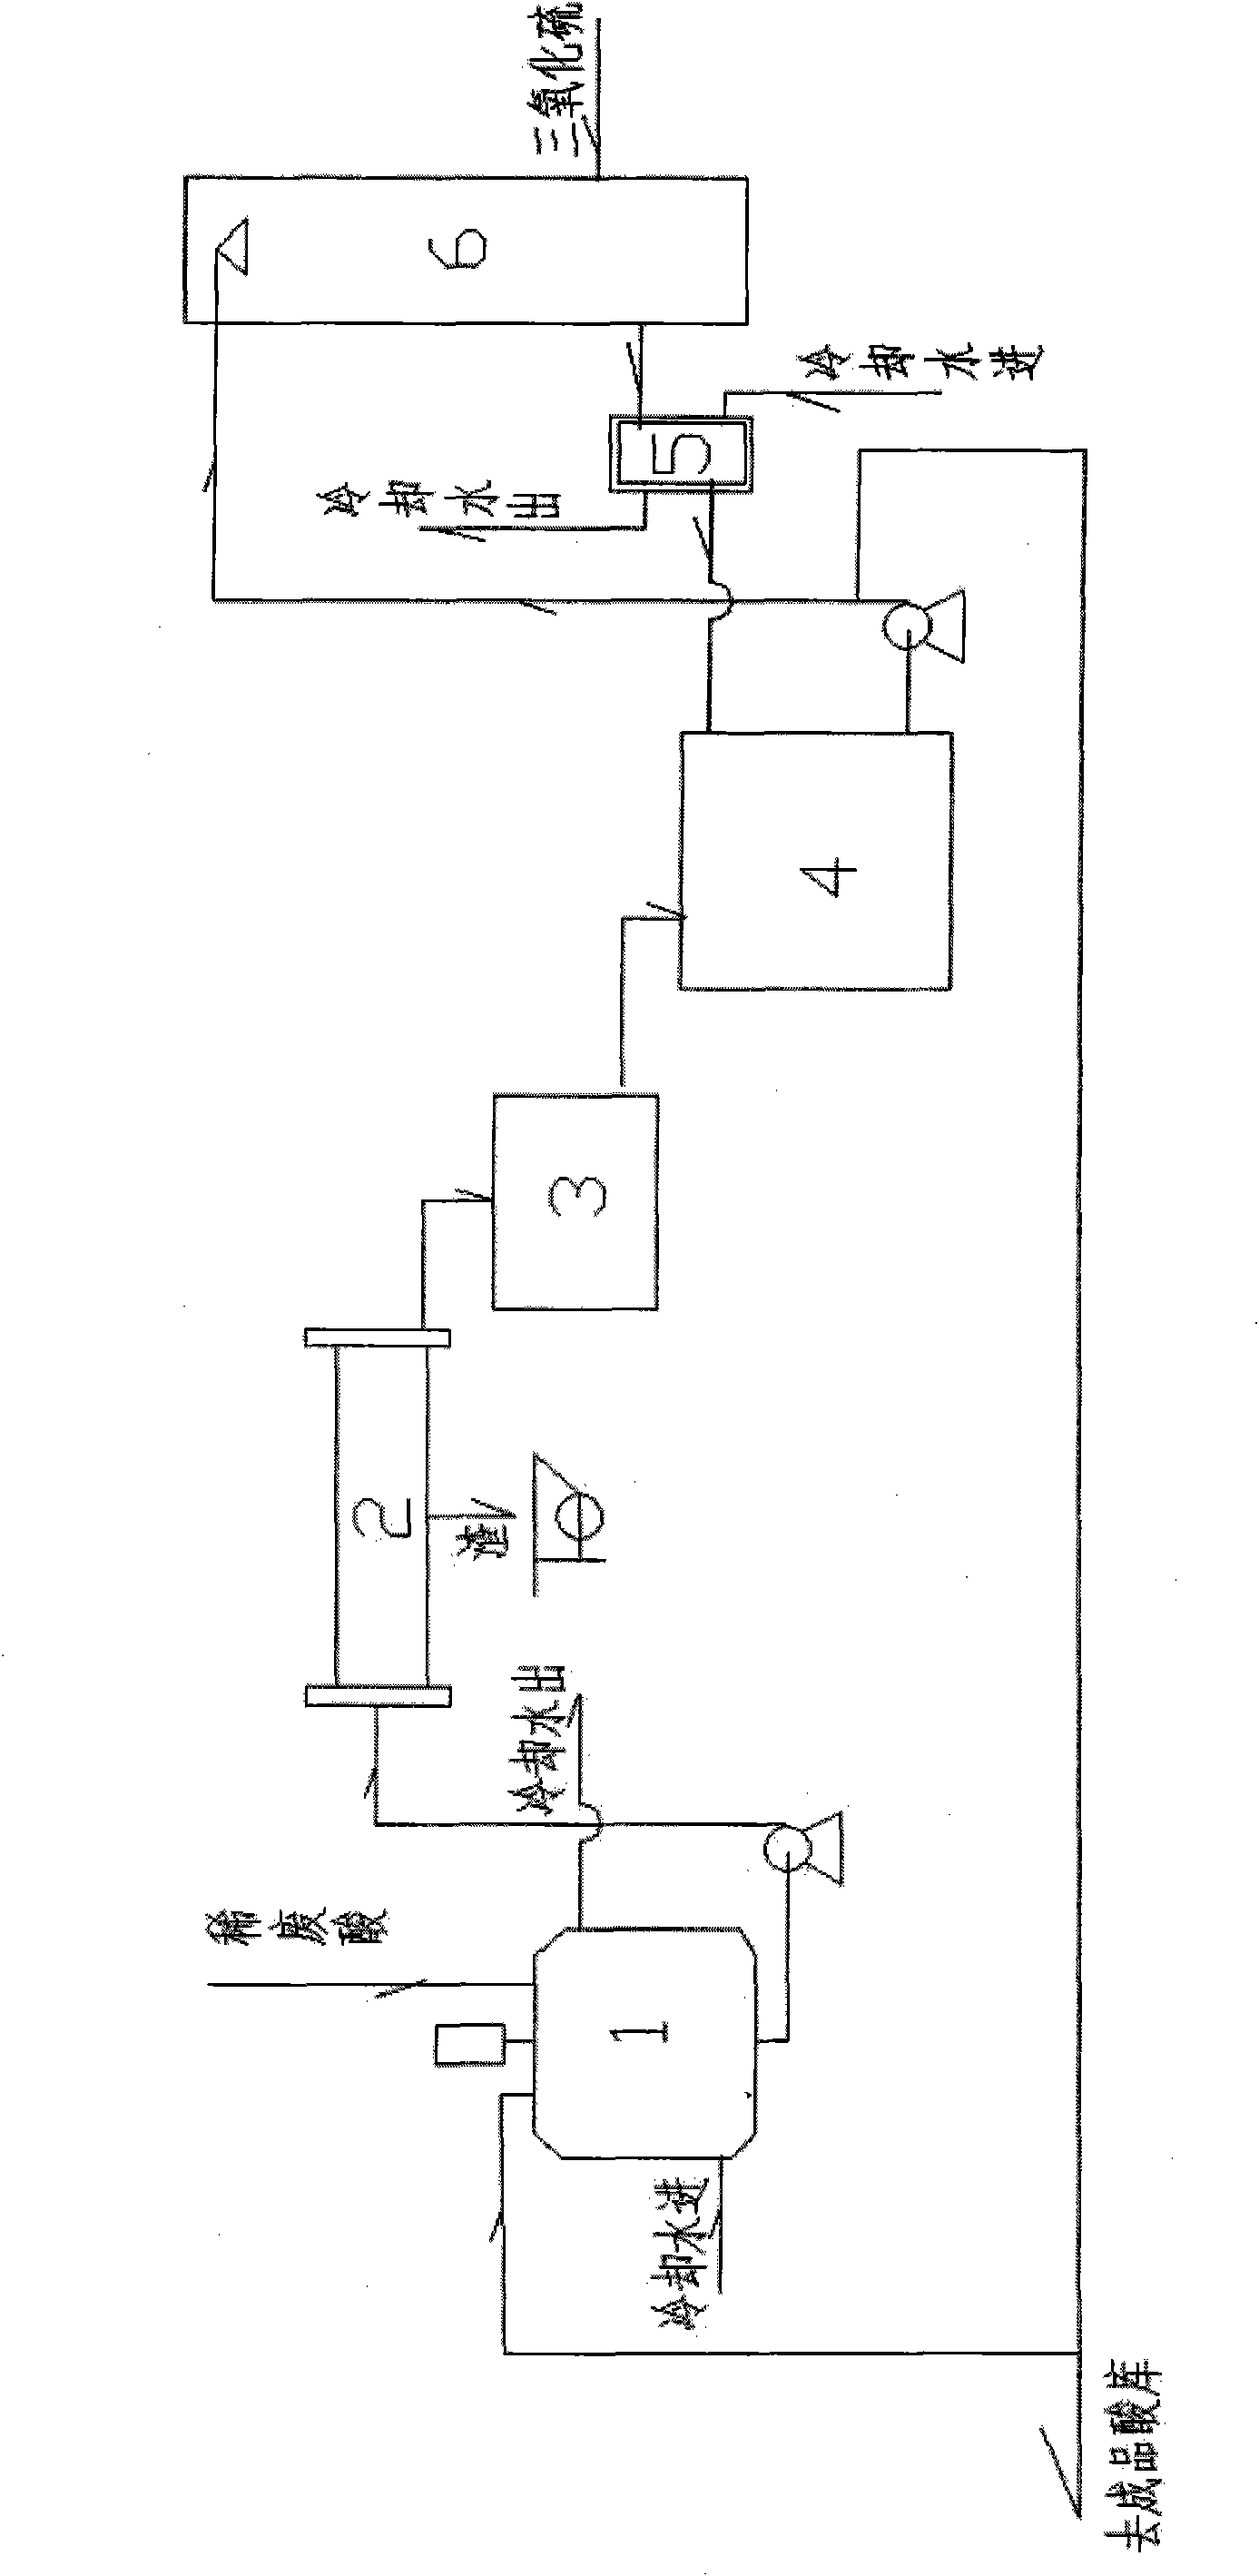 Method and device for producing concentrated sulfuric acid by recycling waste acid from sulfate process titanium dioxide production